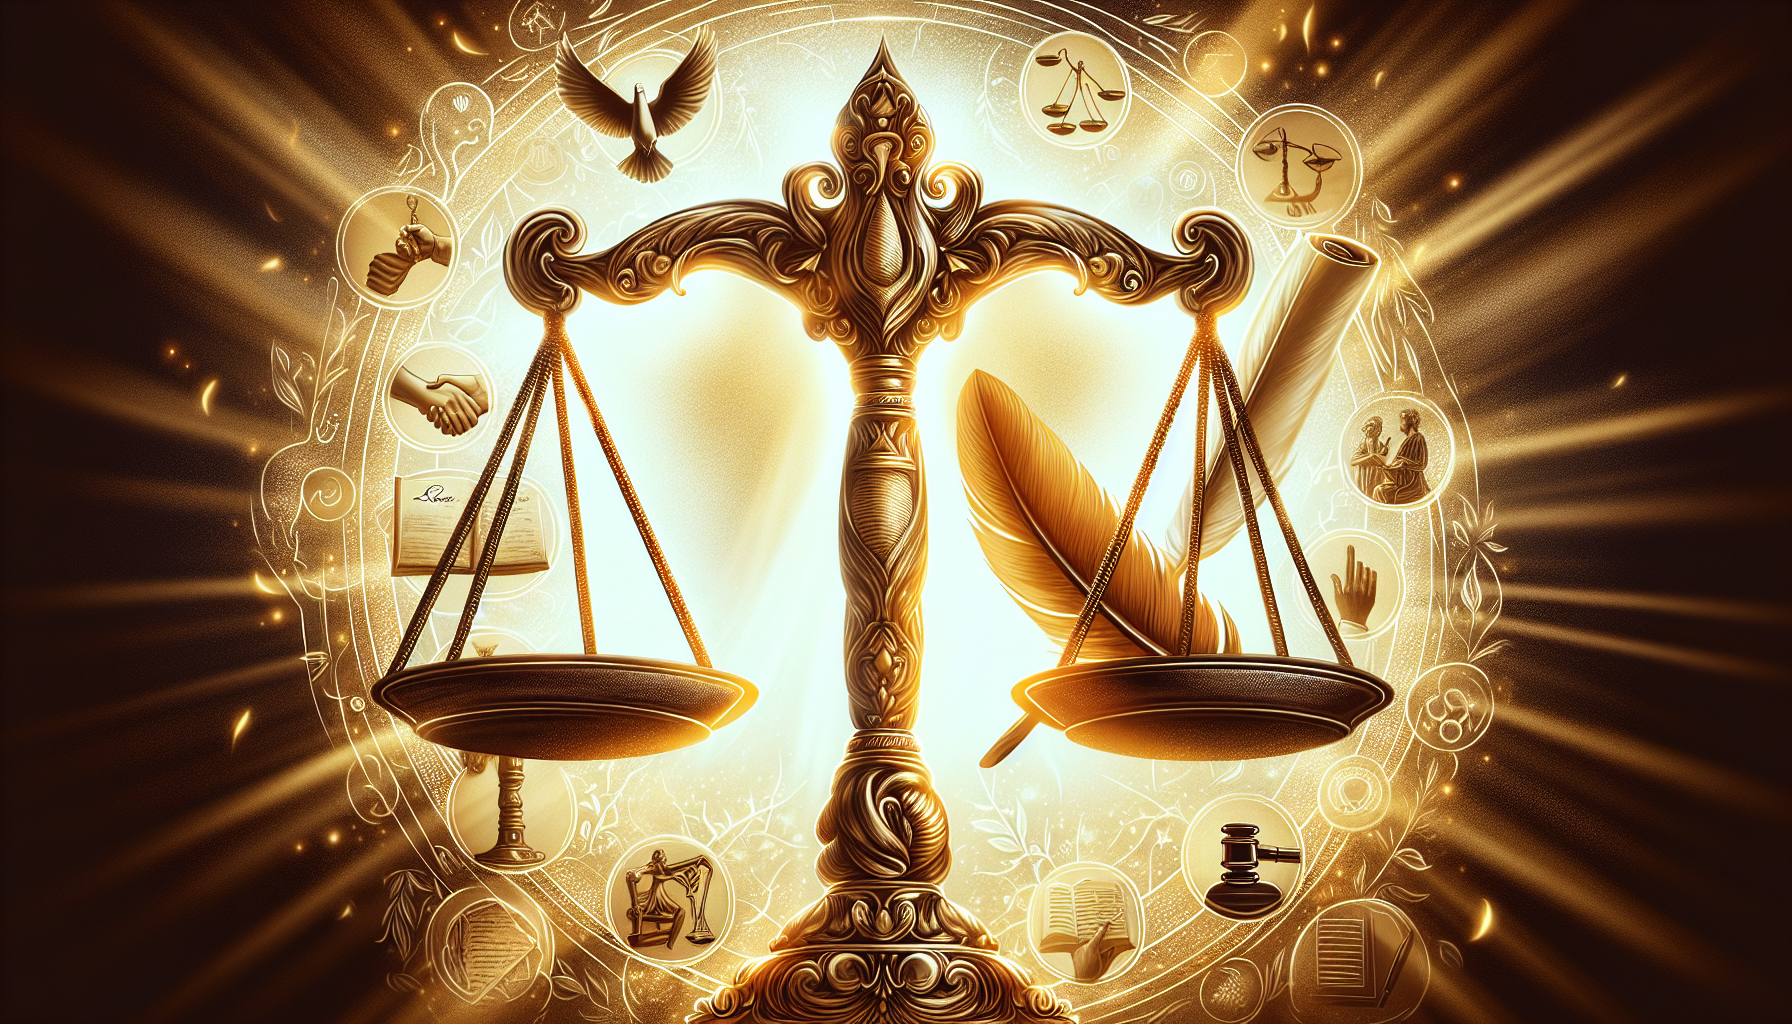 Illustration of a scale symbolizing balance and fairness